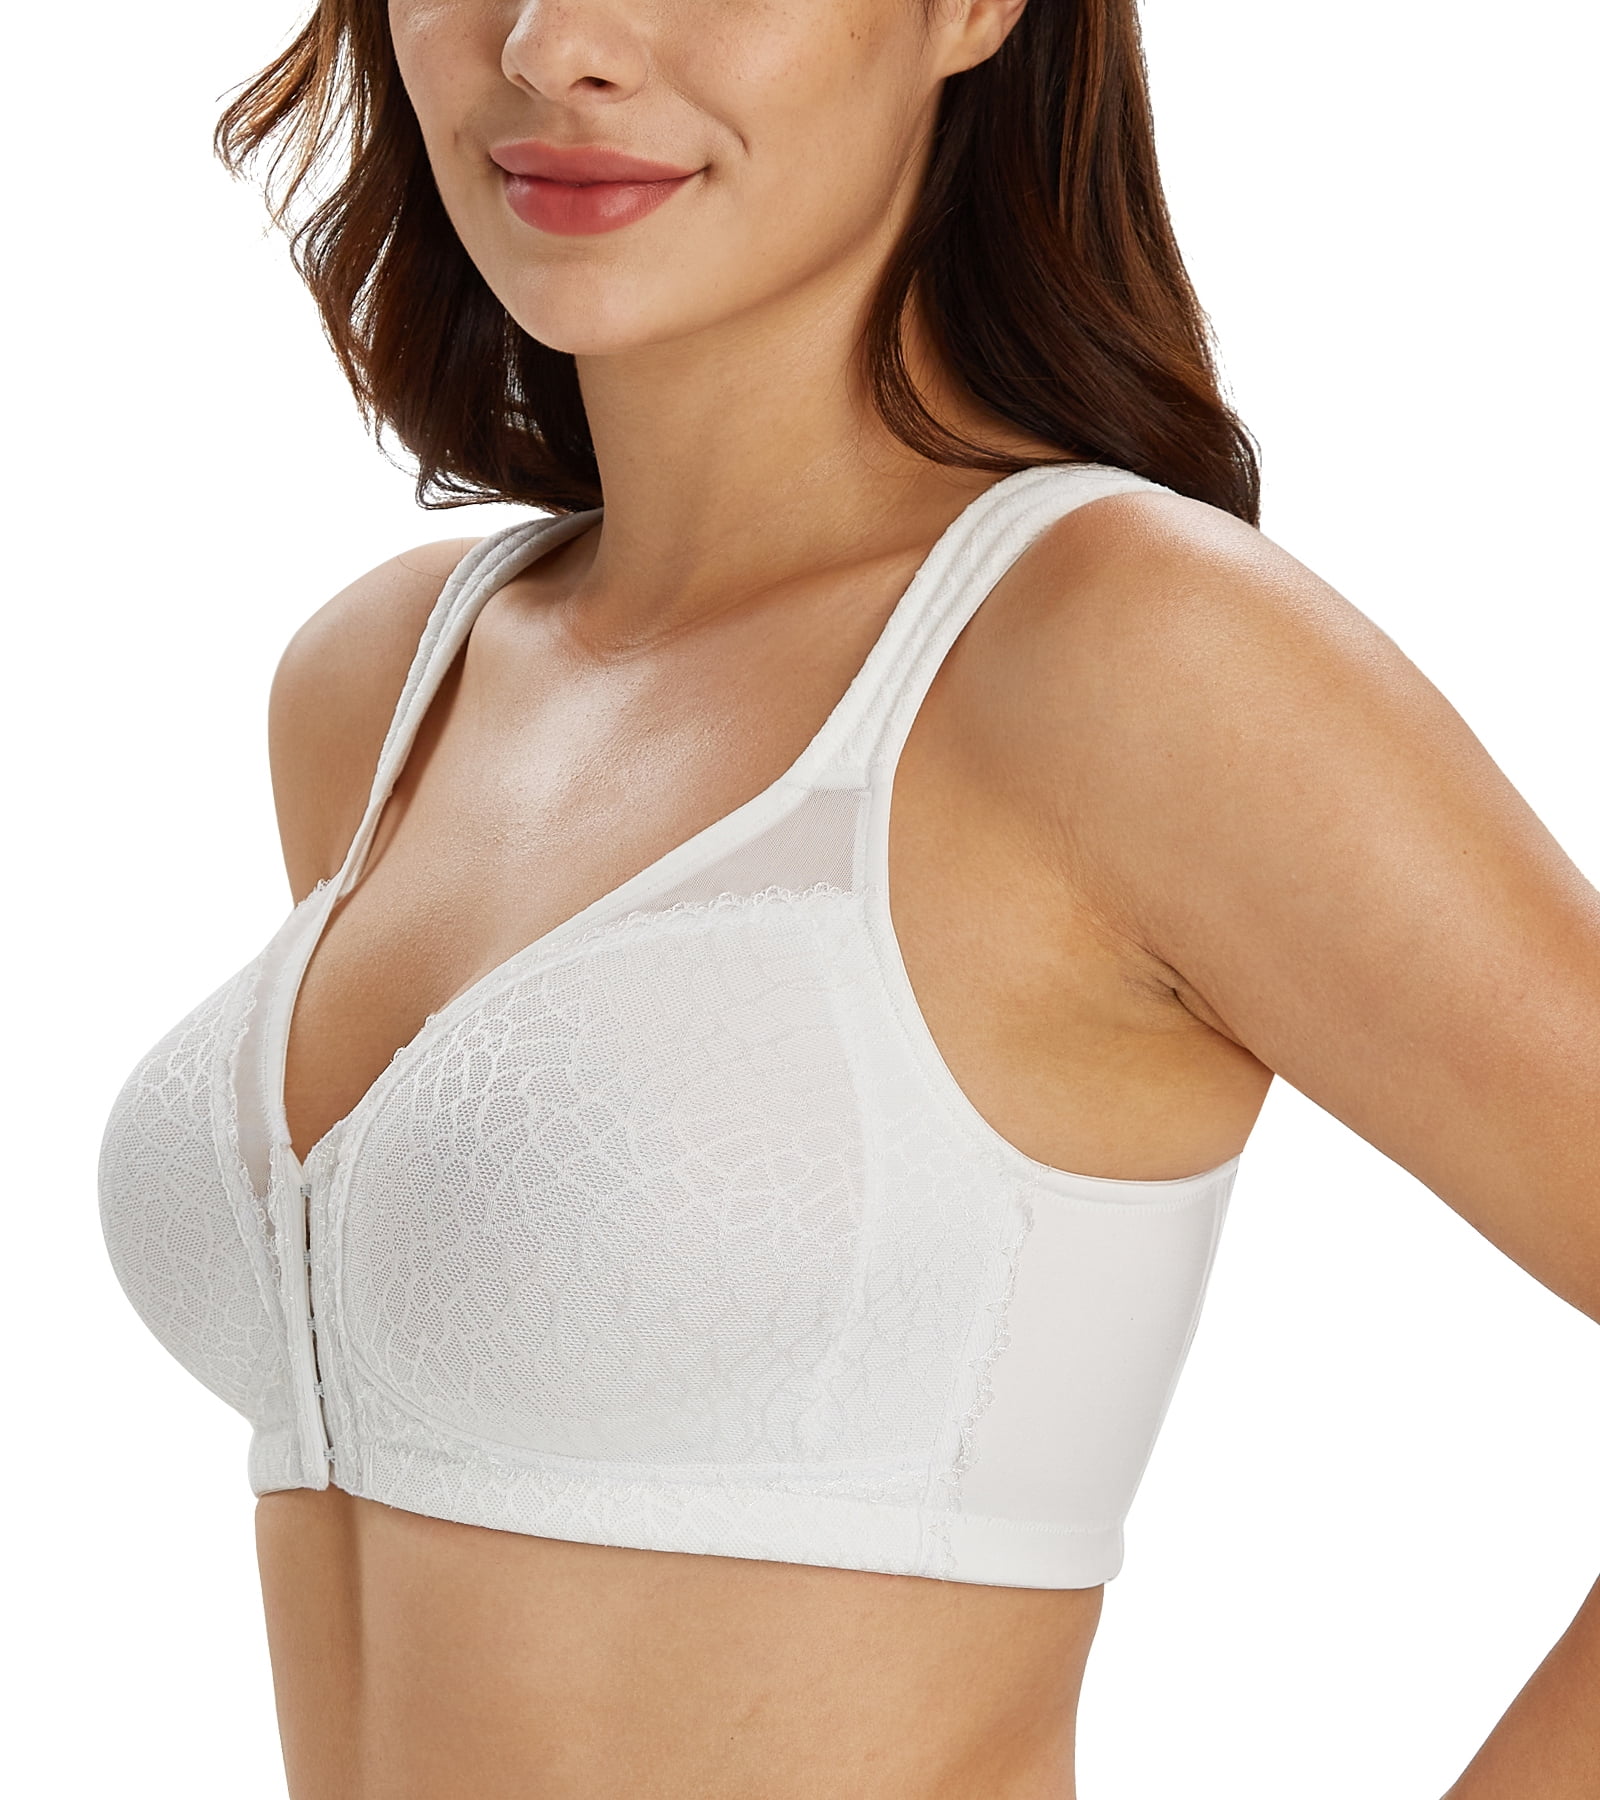 Exclare Women's Front Closure Full Coverage Wirefree Posture Back Everyday  Bra(42DDD, Beige) 